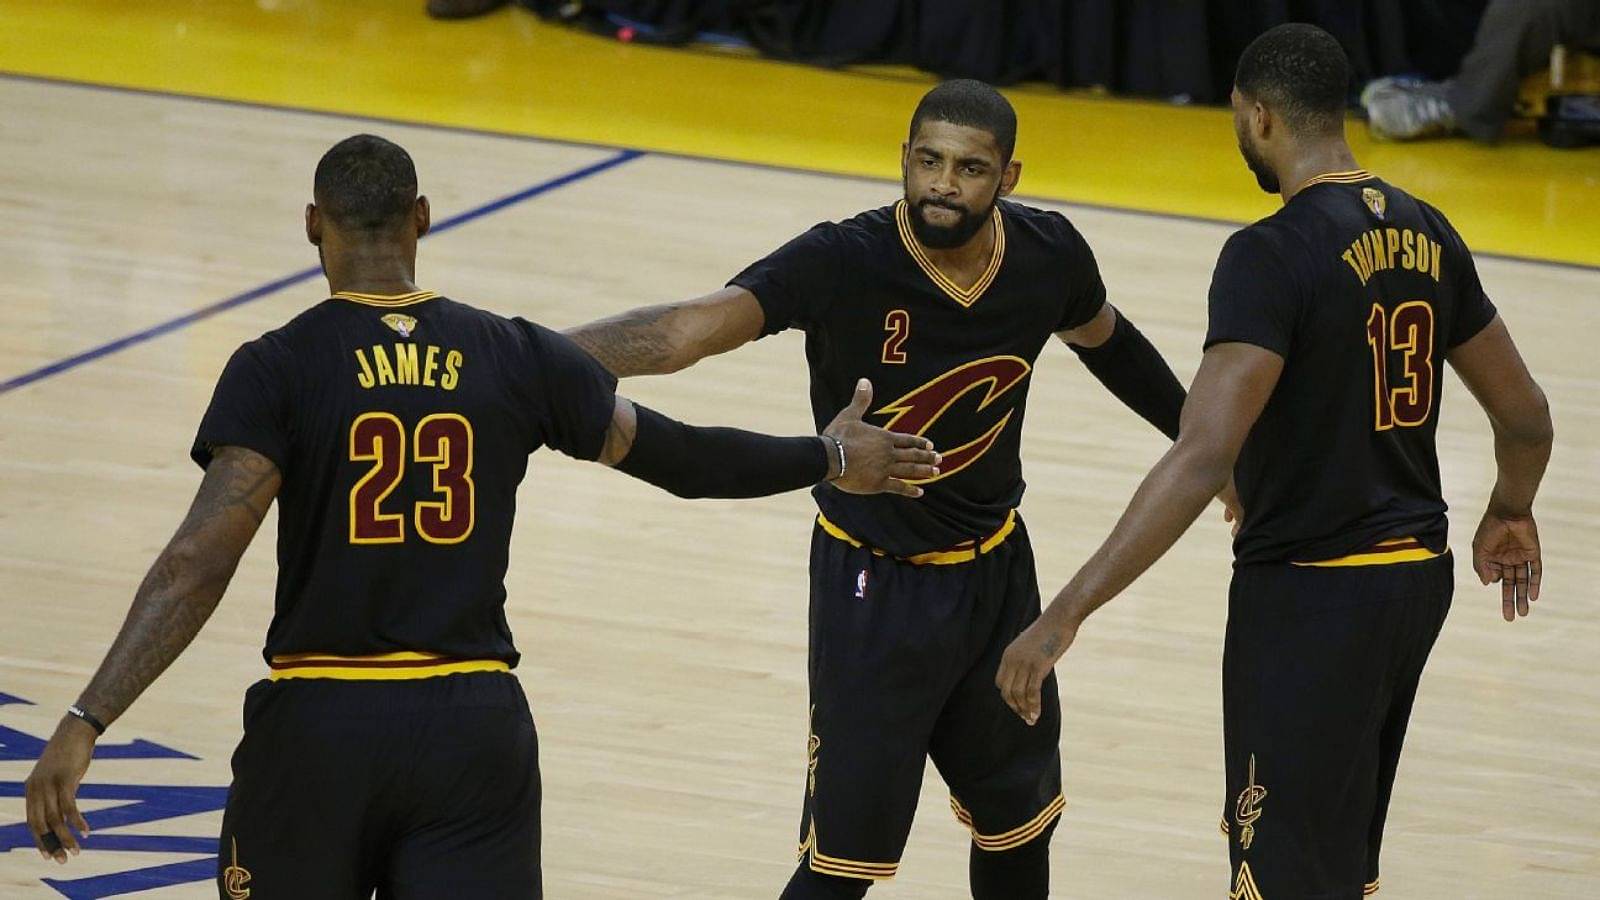 “Kyrie Irving ‘s 41-point game is one of the greatest performances I’ve ever seen live”: When LeBron James caught the best seat to witness greatness in Game 5 of 2016 NBA Finals